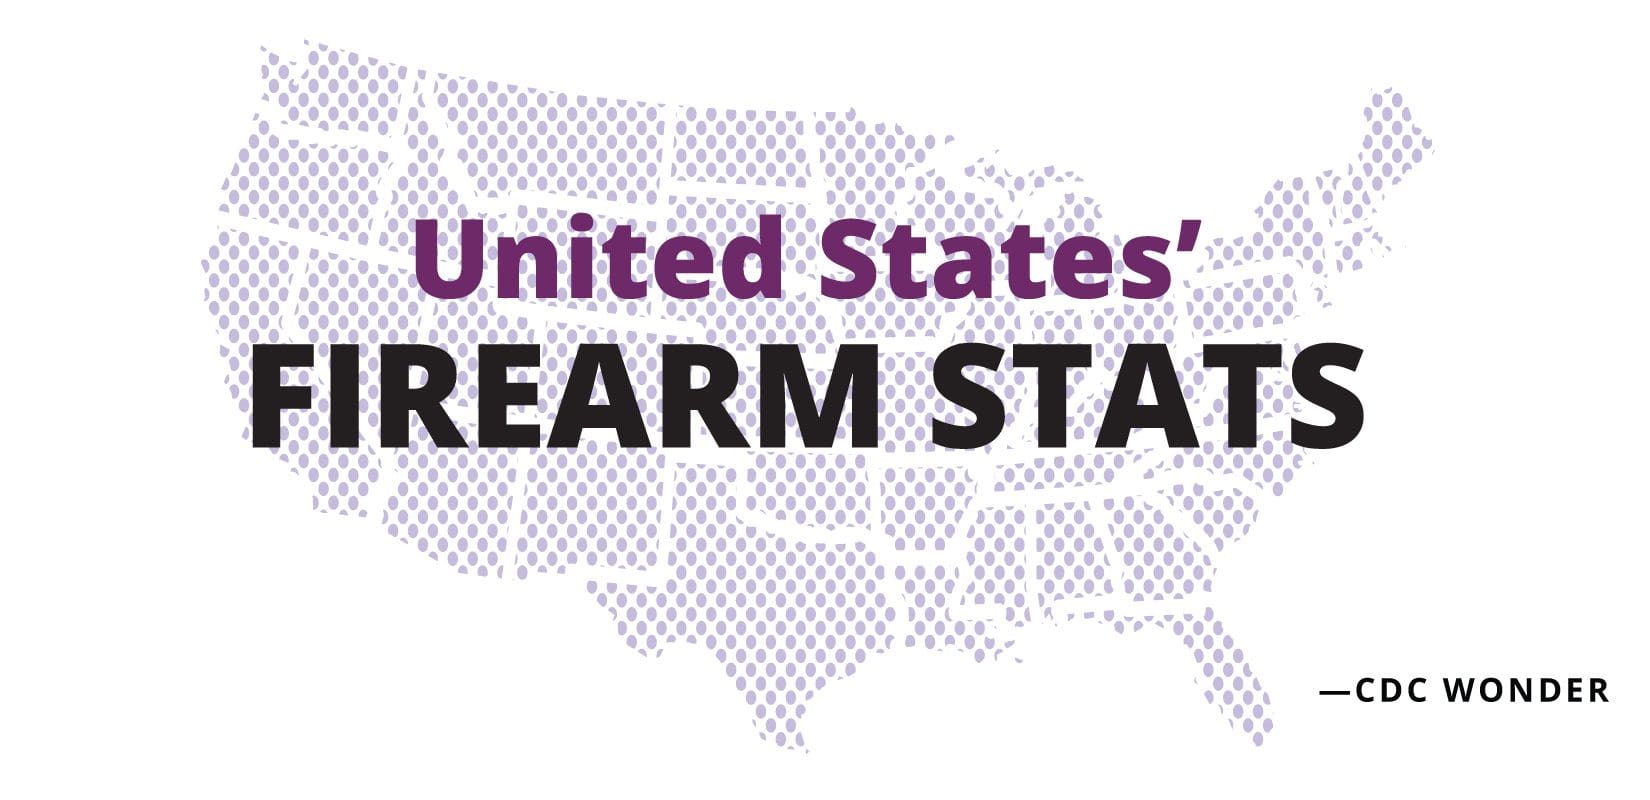 United States' FIREARM STATS with map of states in background. Source: CDC Wonder.